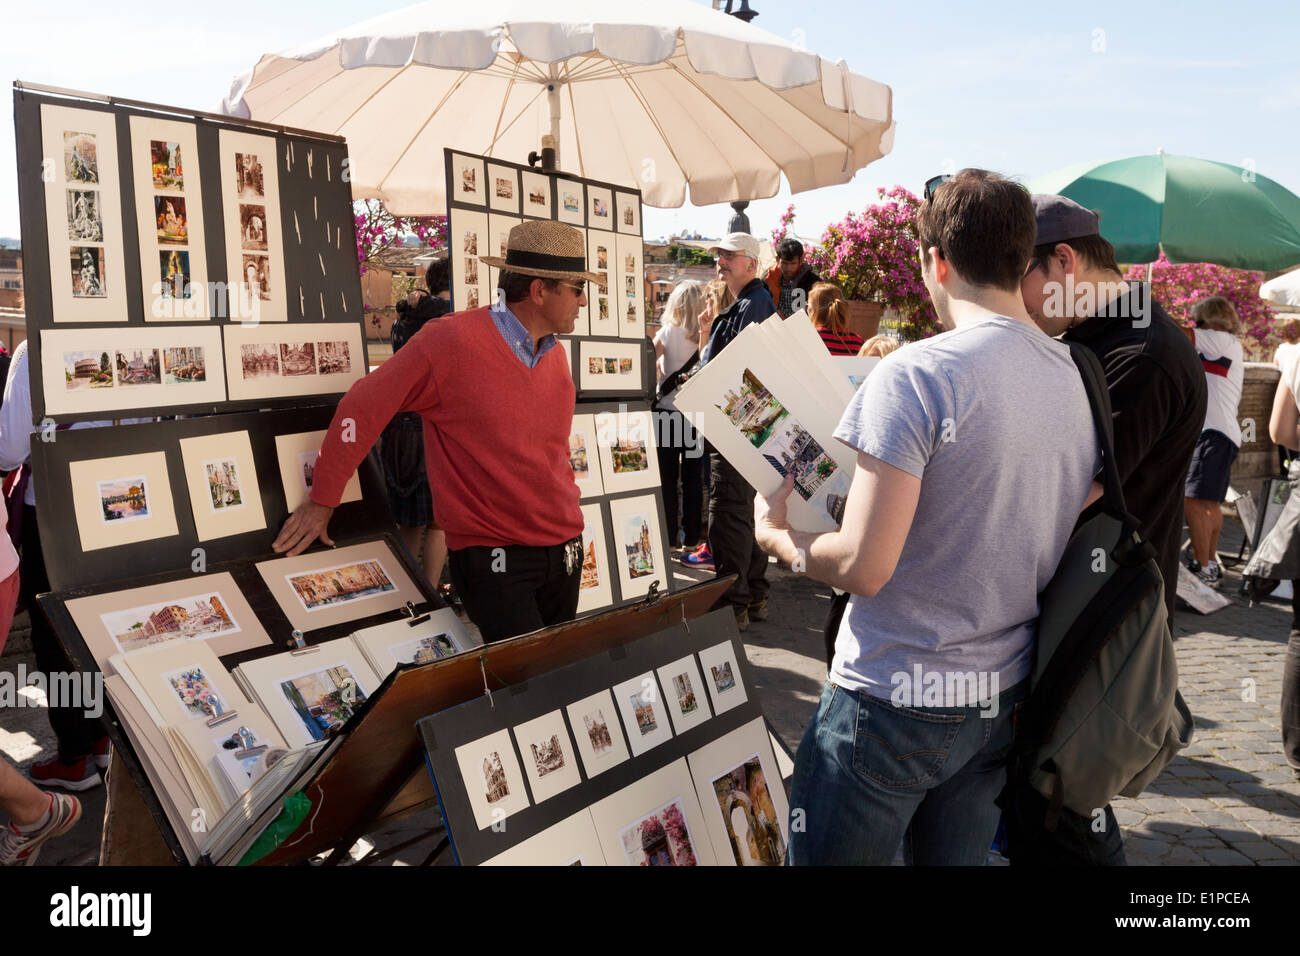 Tourists buying pictures at a street stall, The Spanish Steps, Rome Italy Stock Photo